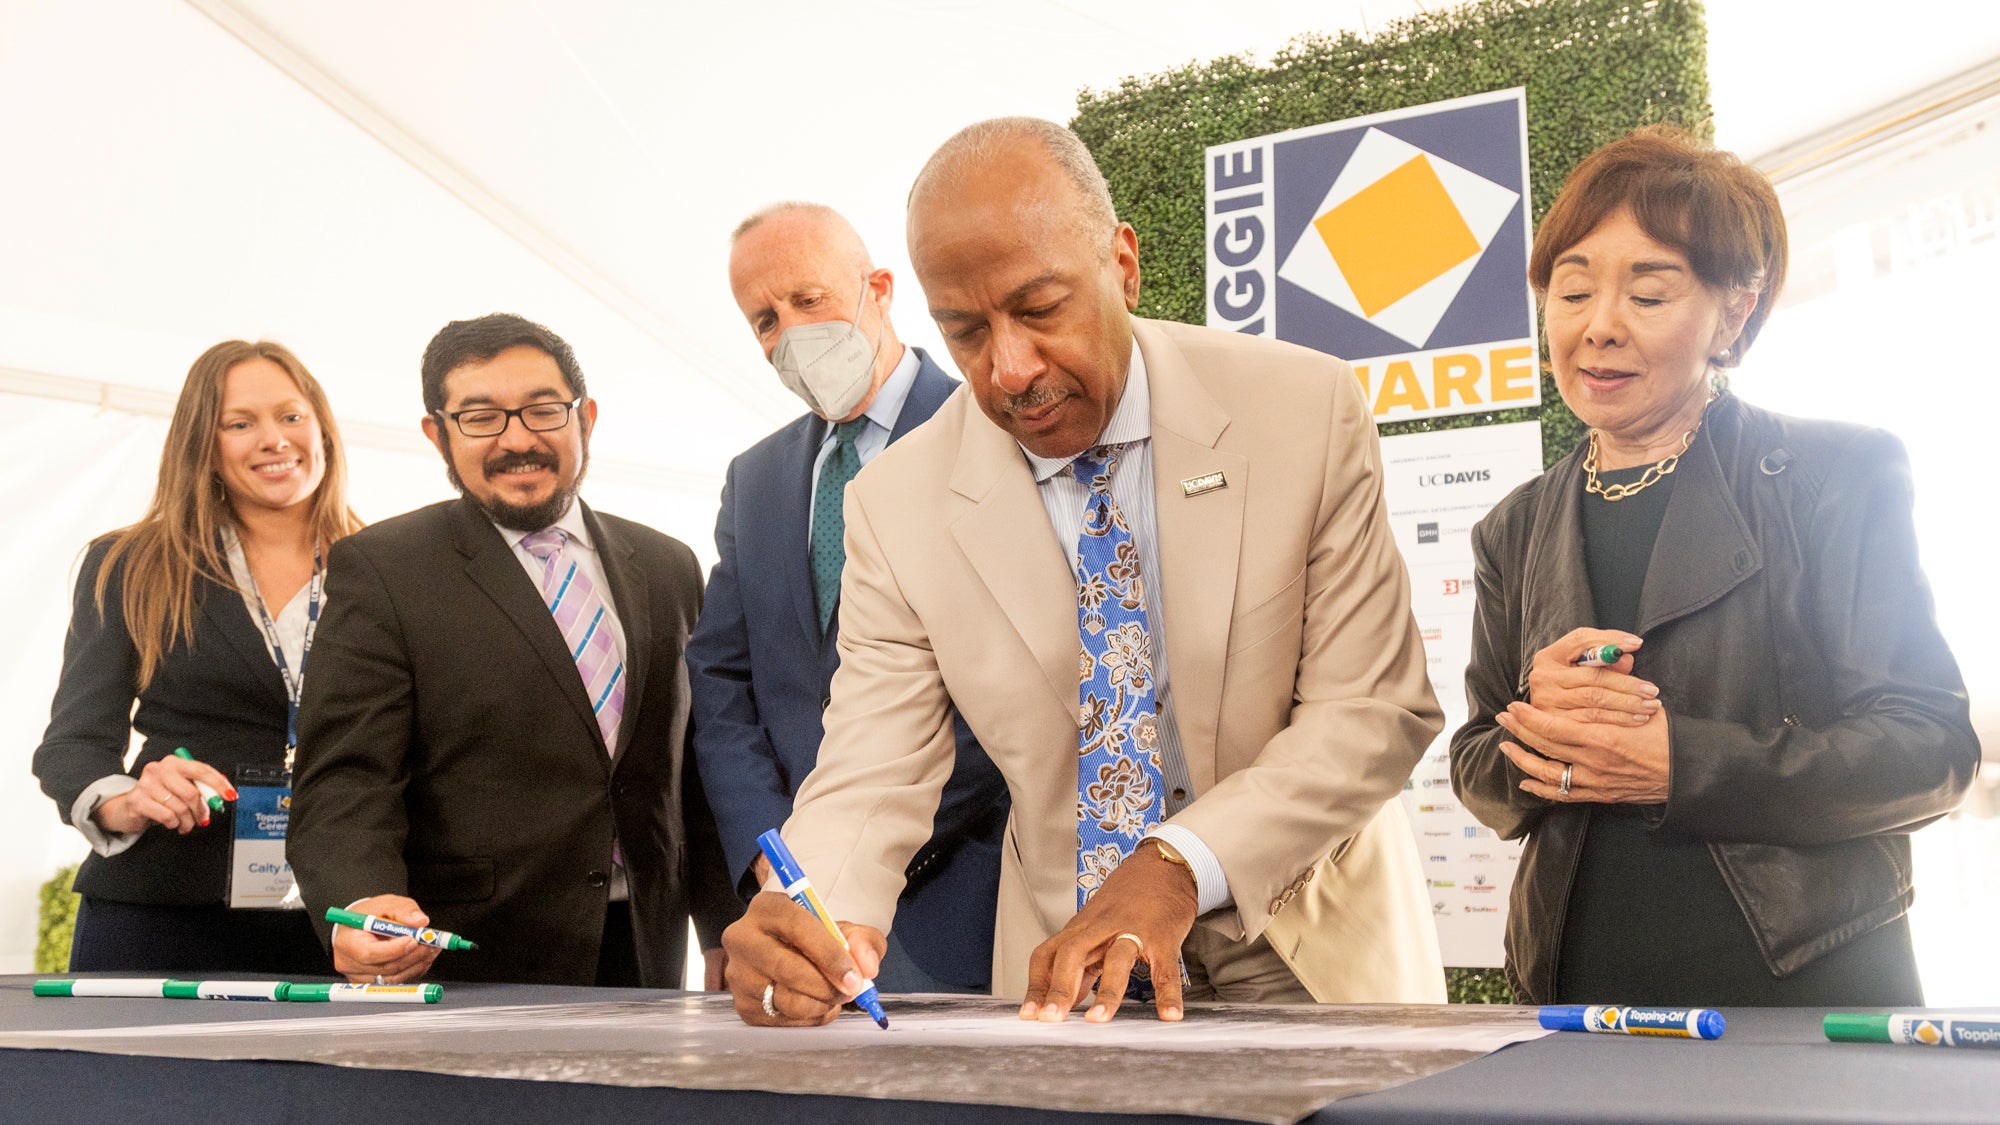 UC Davis Chancellor Gary S. May in tan suit signs Aggie Square poster